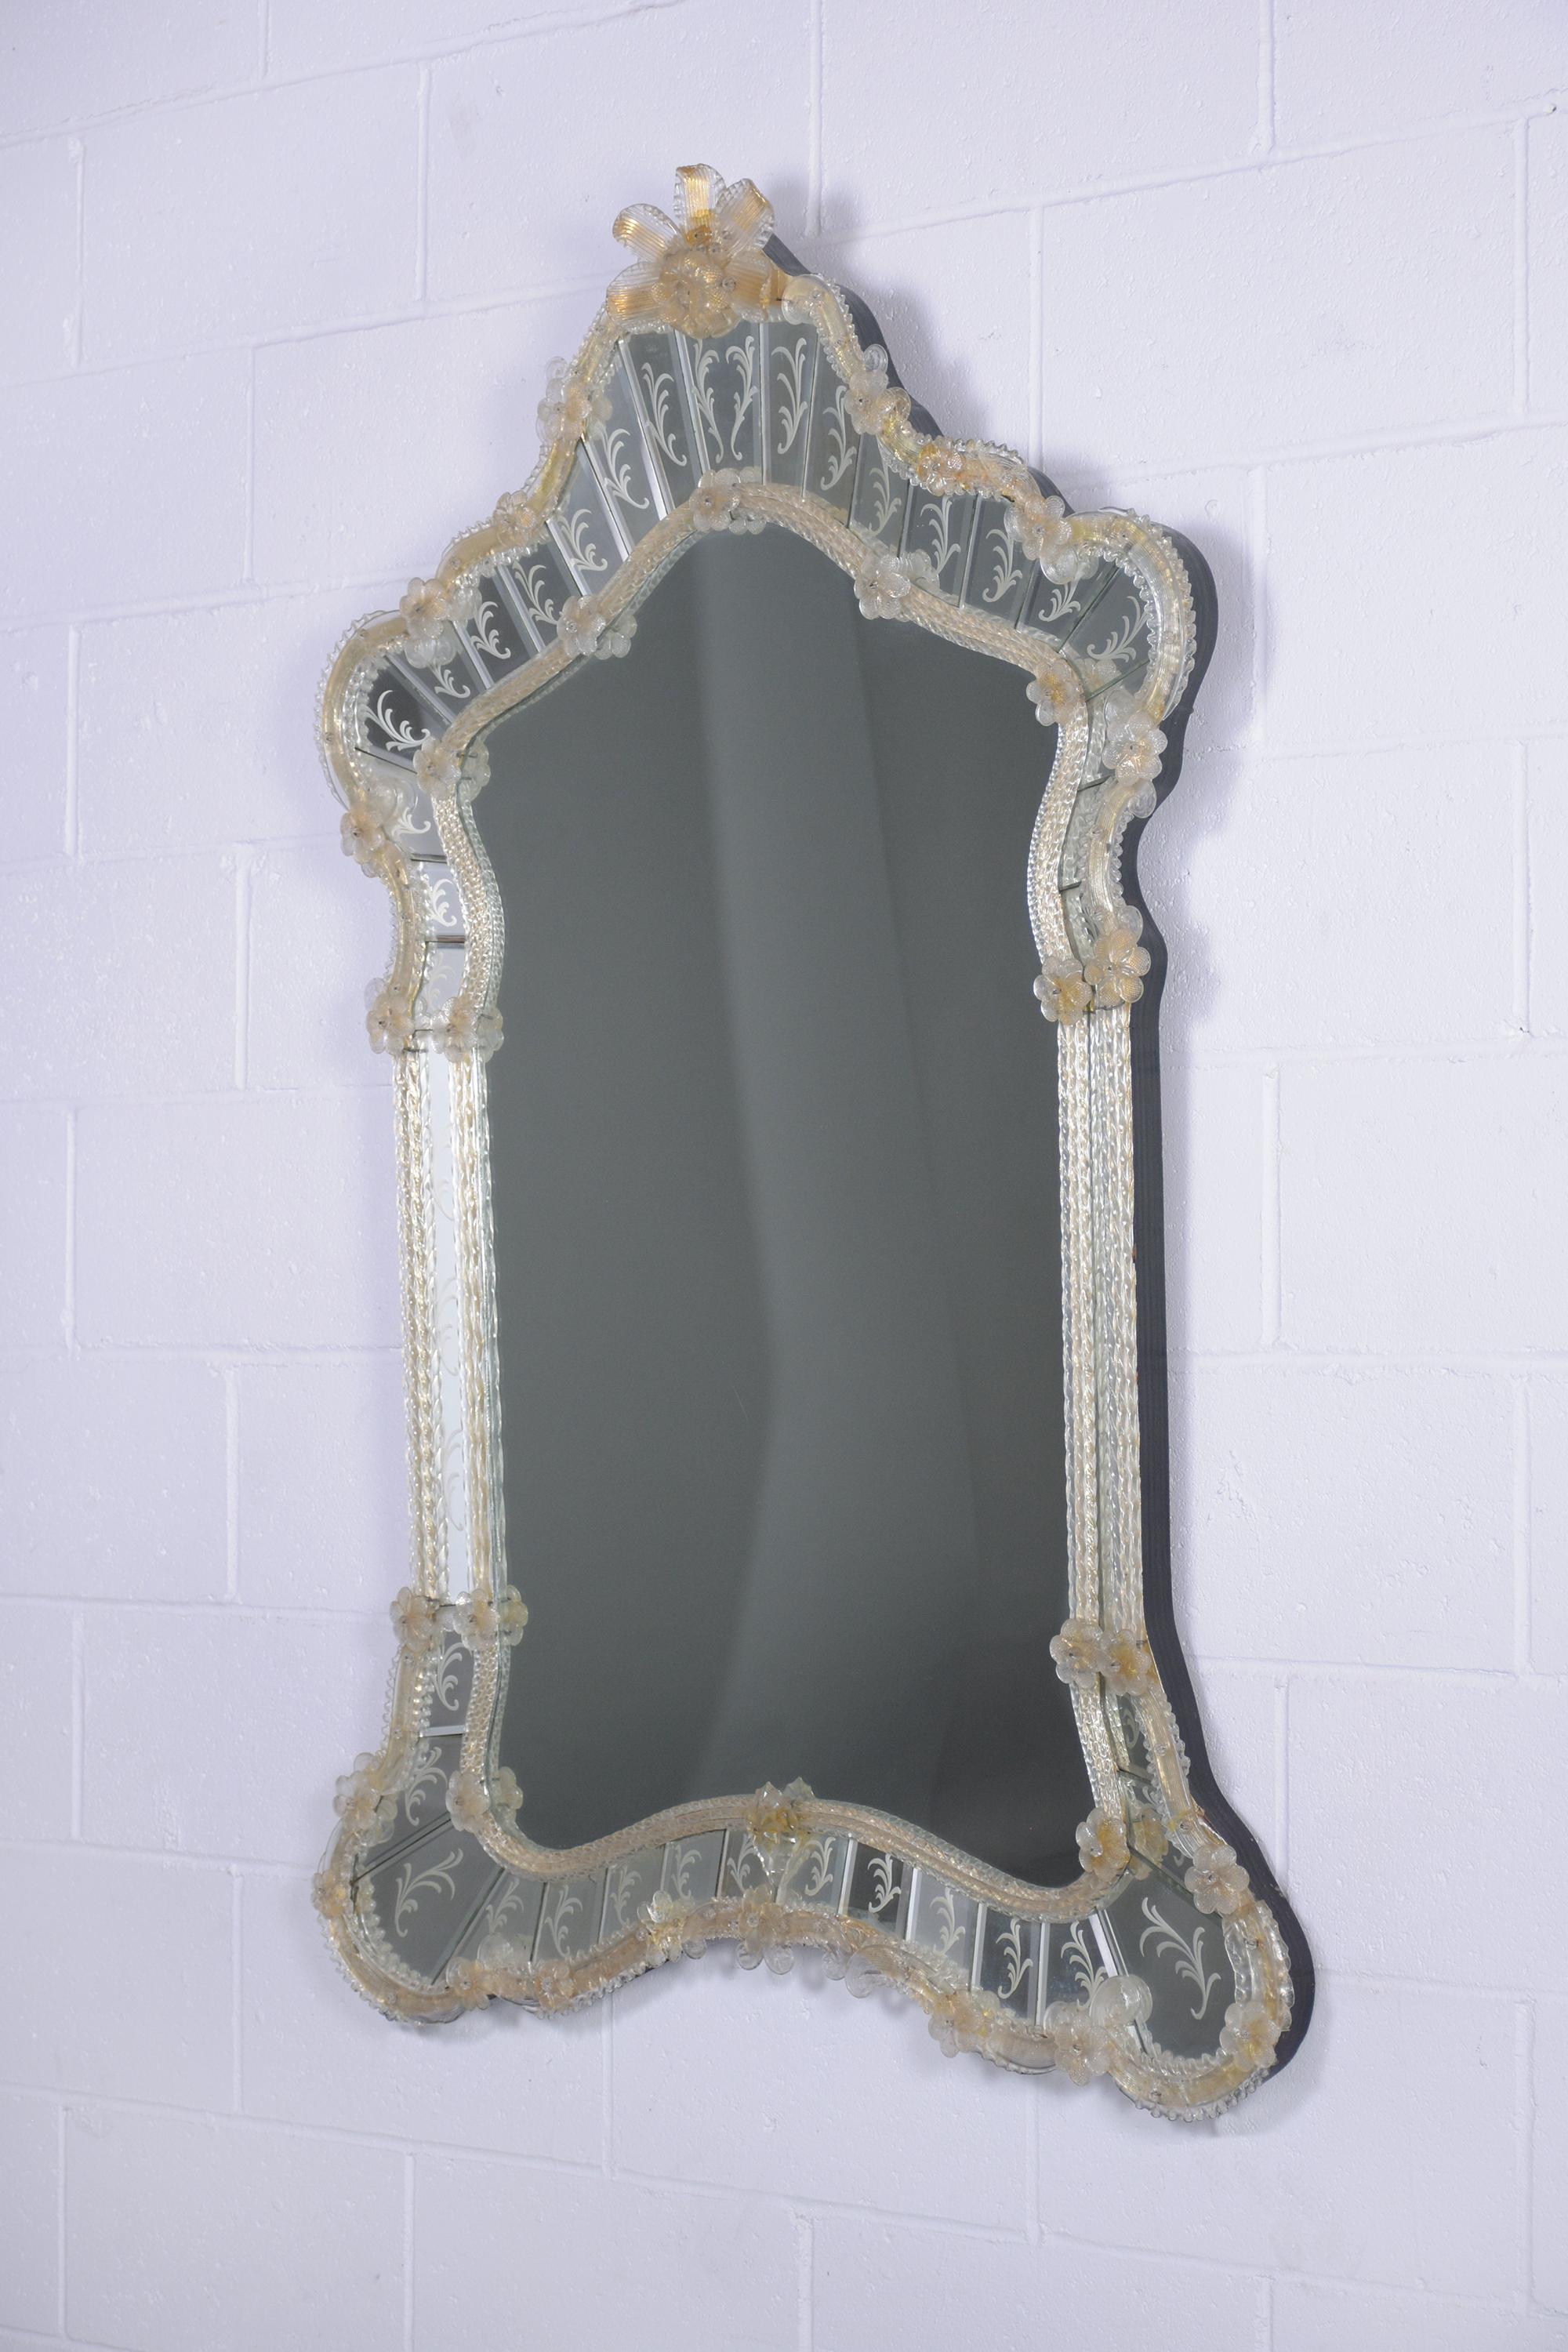 Discover the artistry of this extraordinary vintage Italian mirror, masterfully hand-crafted and preserved in very good condition. The mirror showcases a delicate etched leaf design encircling its periphery, adding to its elegance. What truly sets